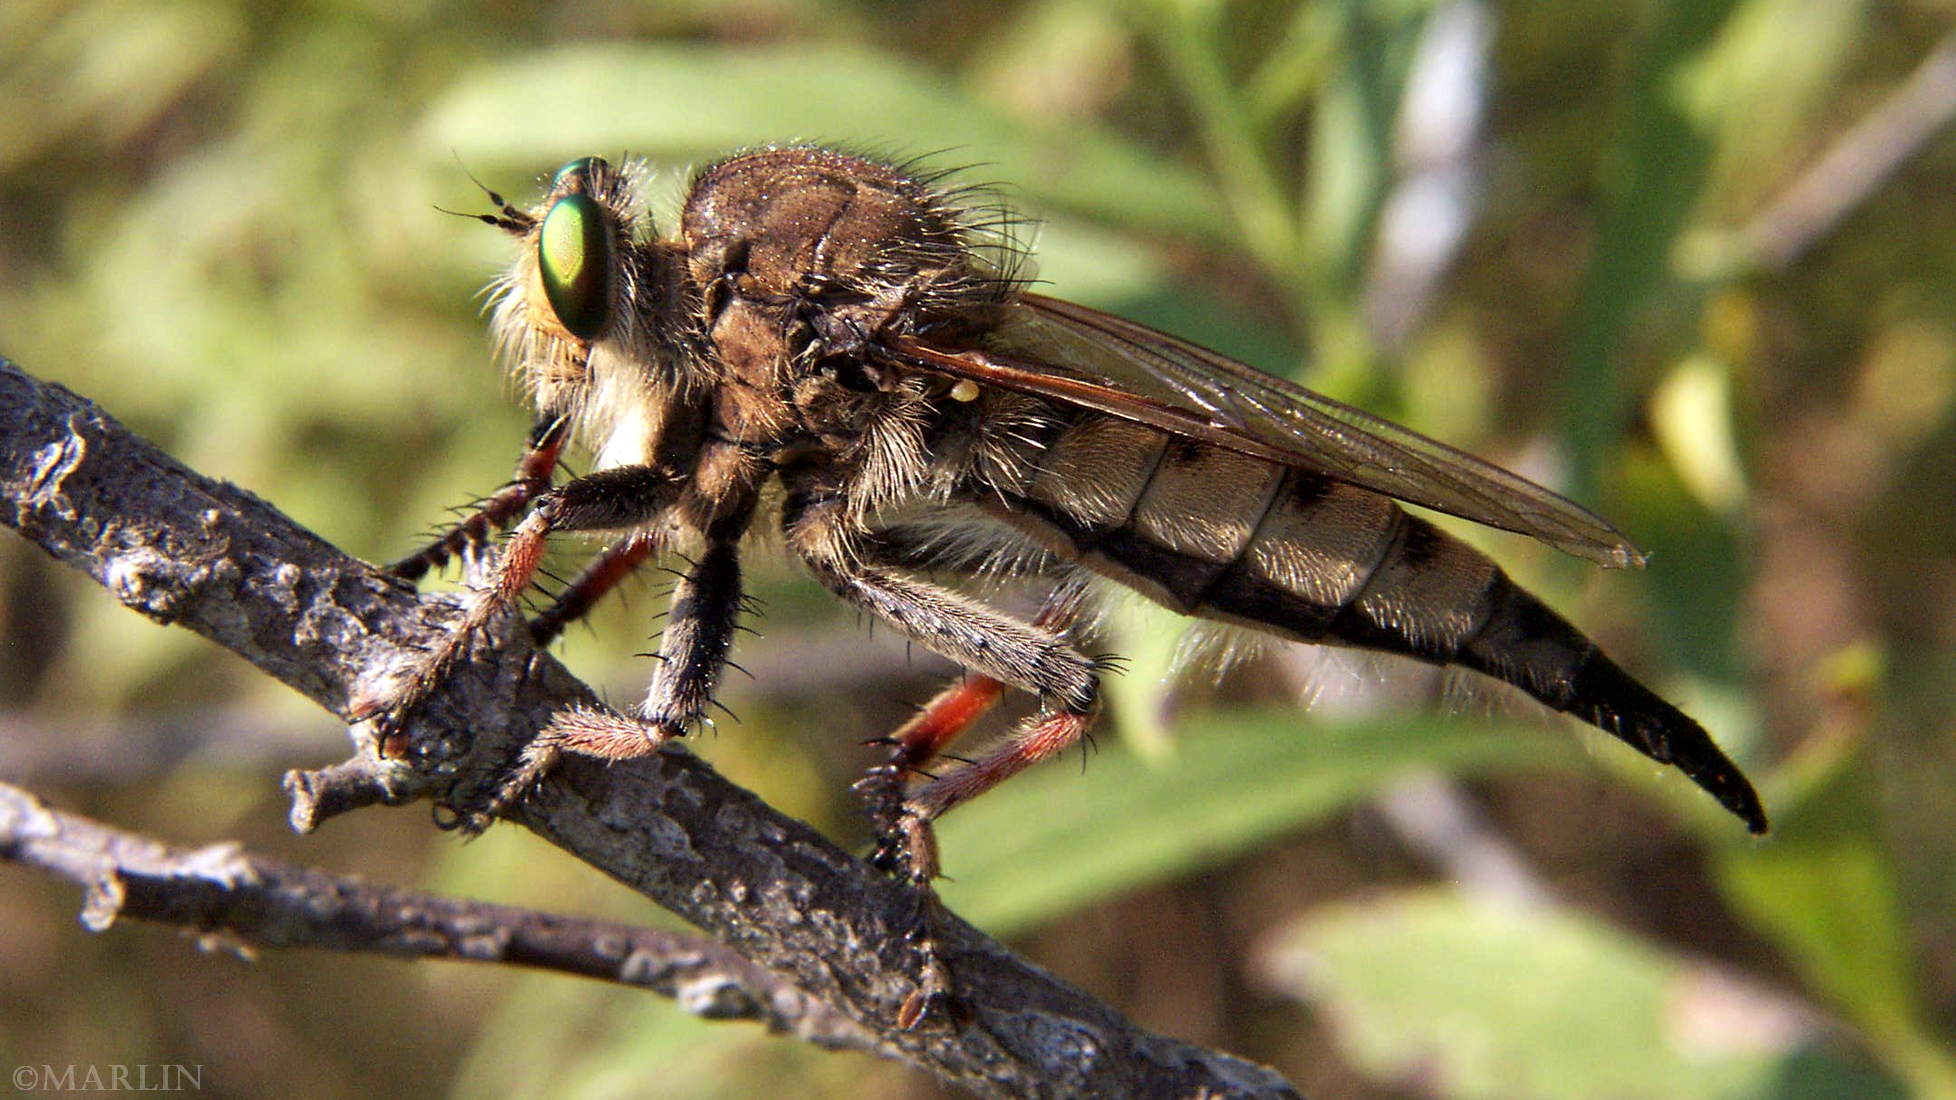 color macrophoto of Giant Robber Fly - Promachus species